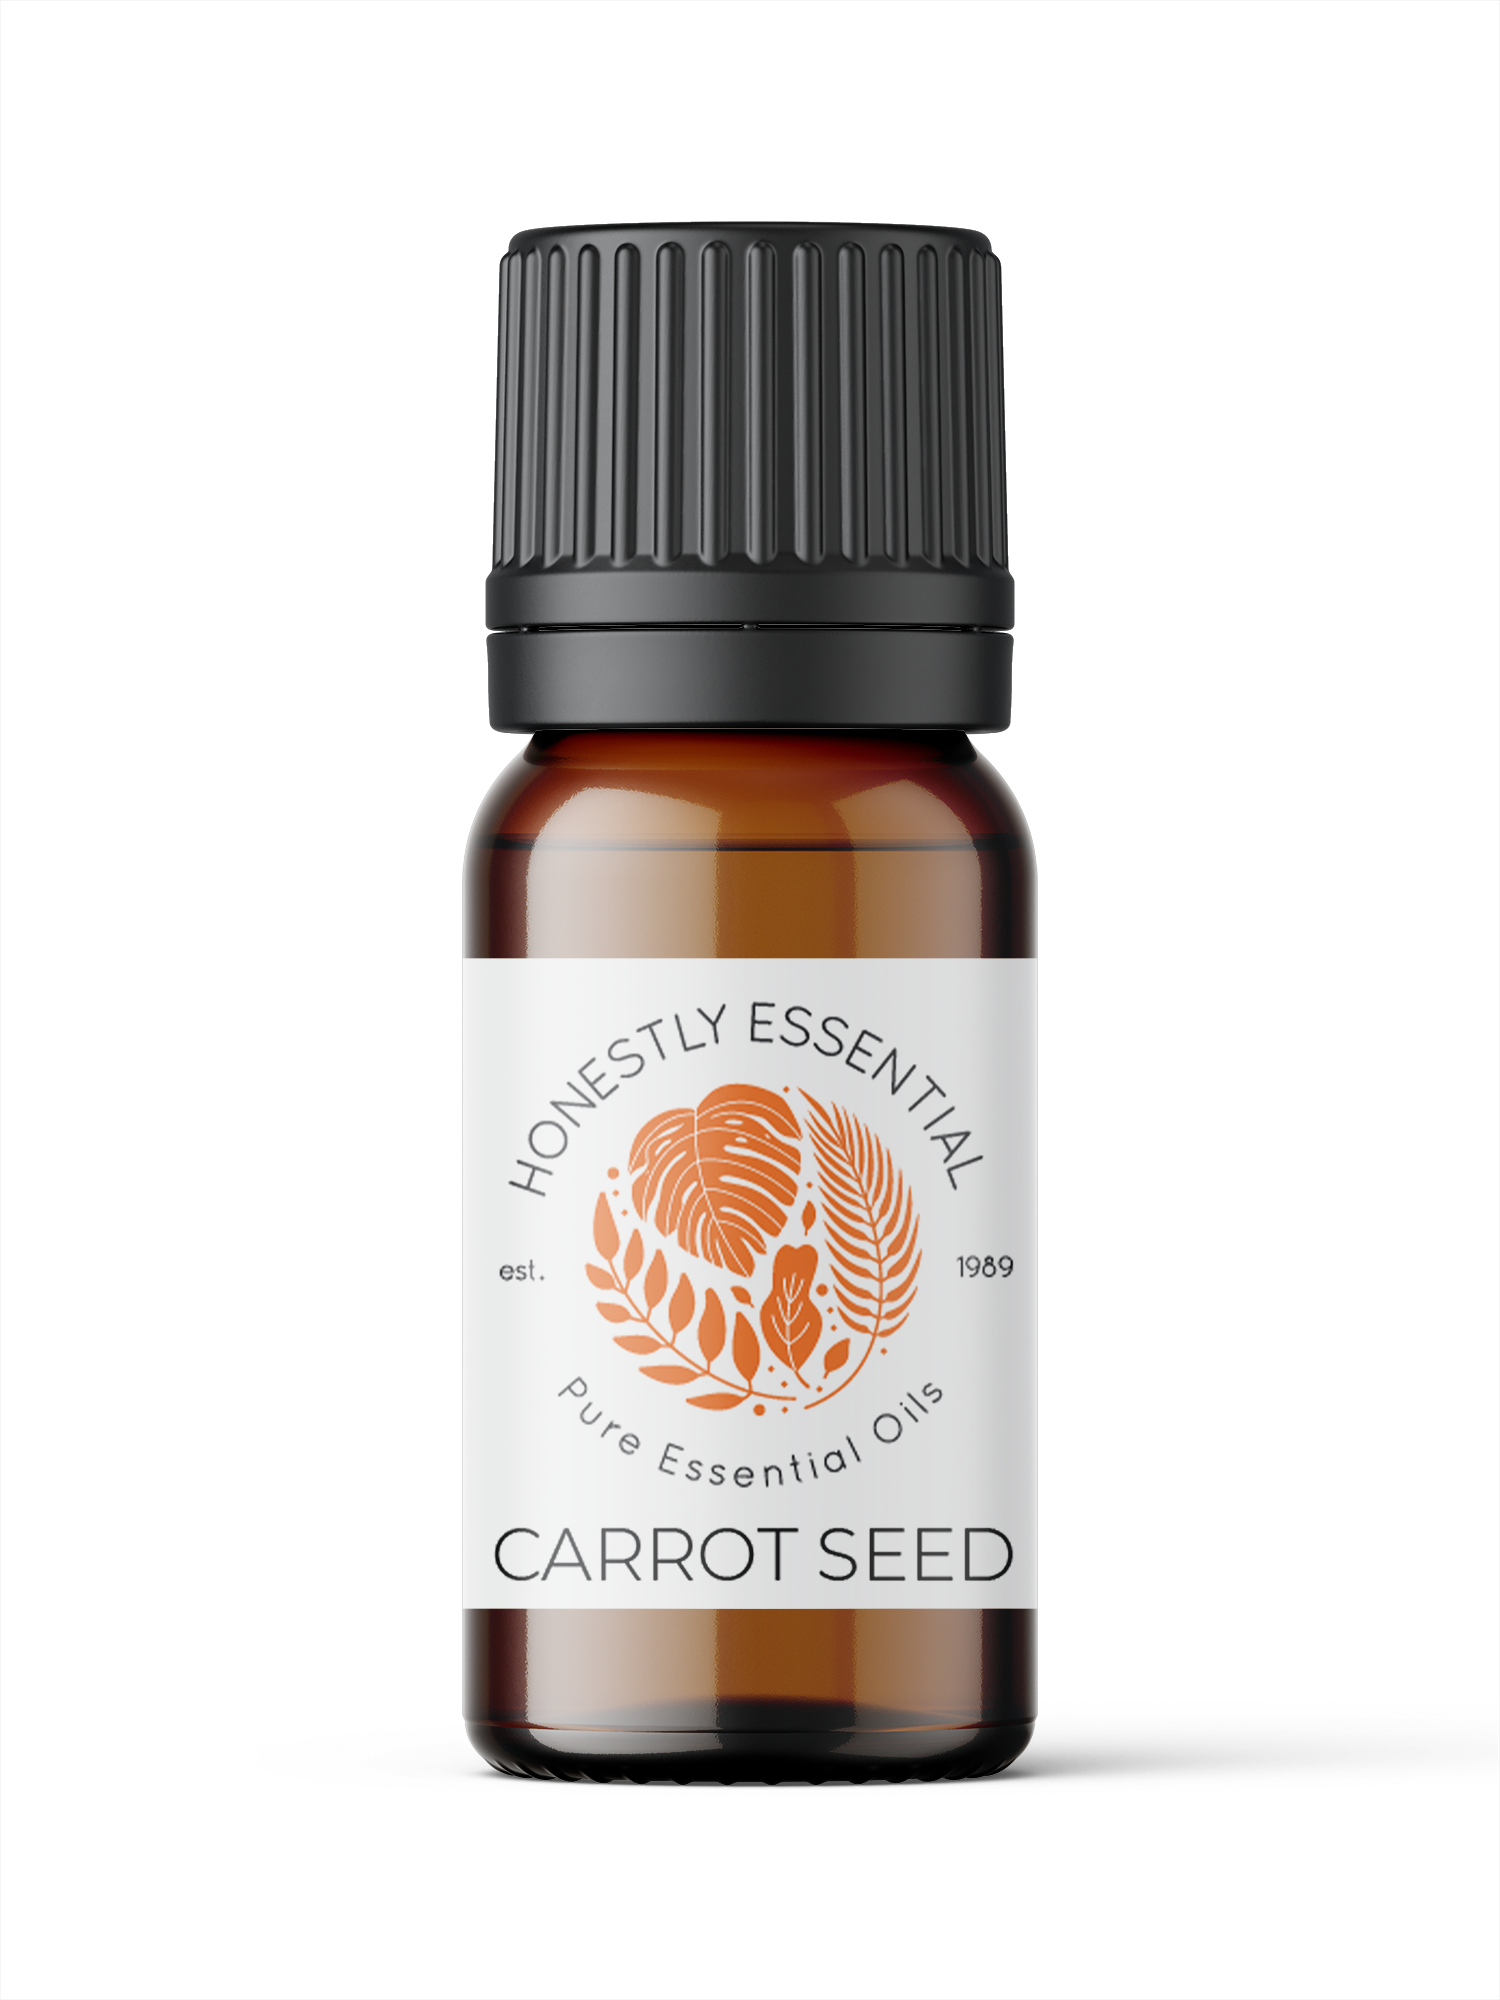 Carrot Seed Essential Oil - Essential Oils | Honestly Essential Oils bruising, immunity, seed, seed essential oils, seeds, sores, wounds